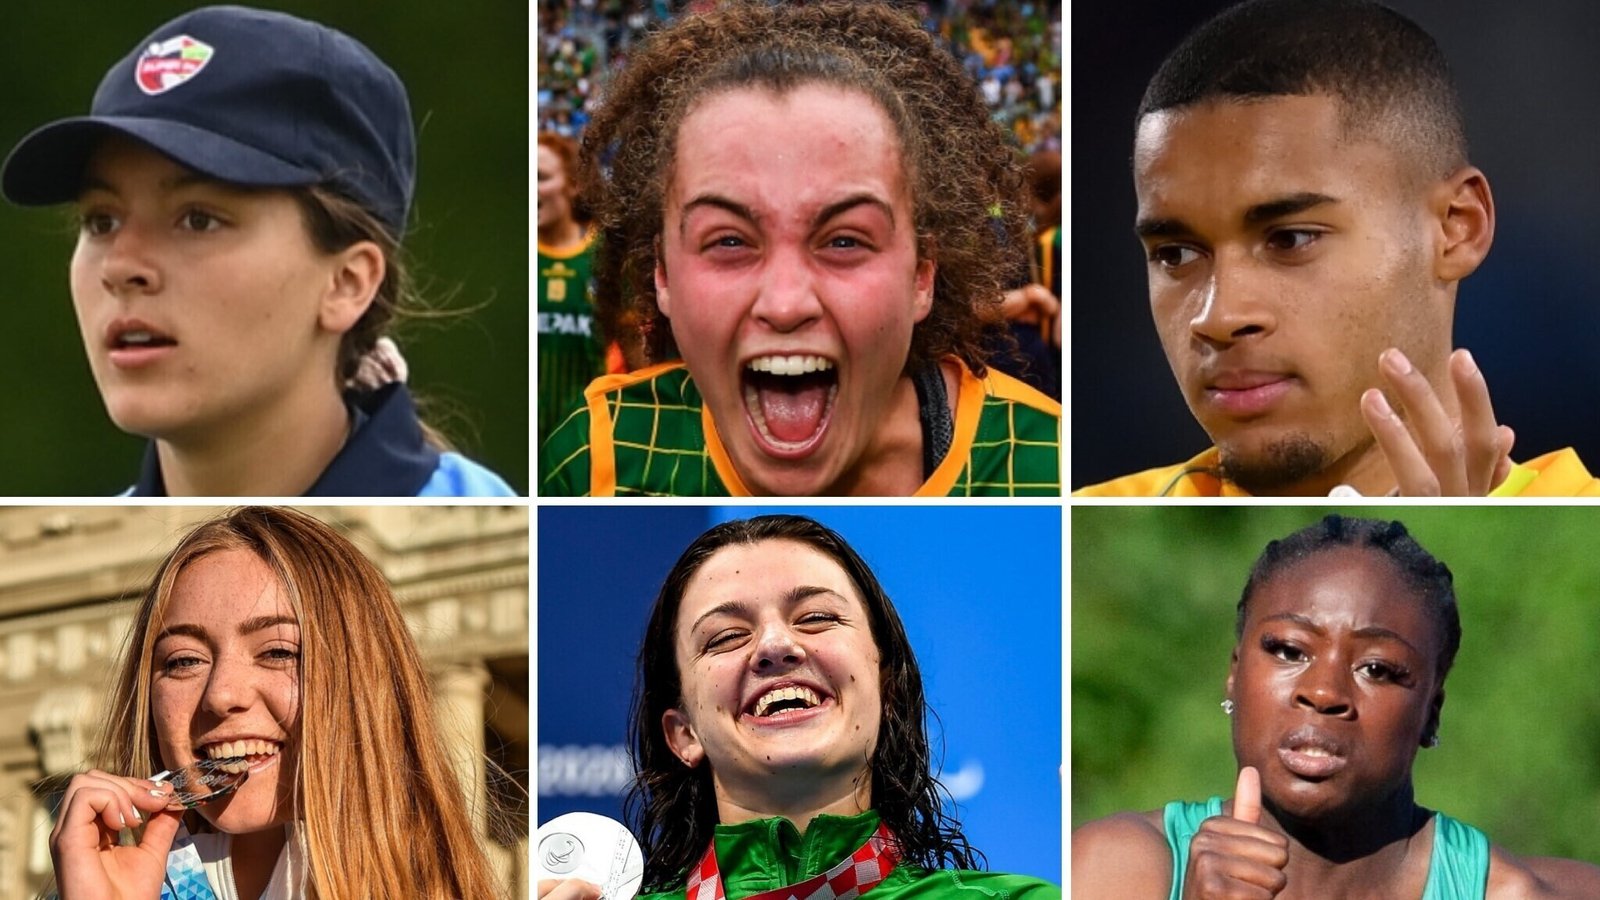 Young Sportsperson of the Year award nominees revealed